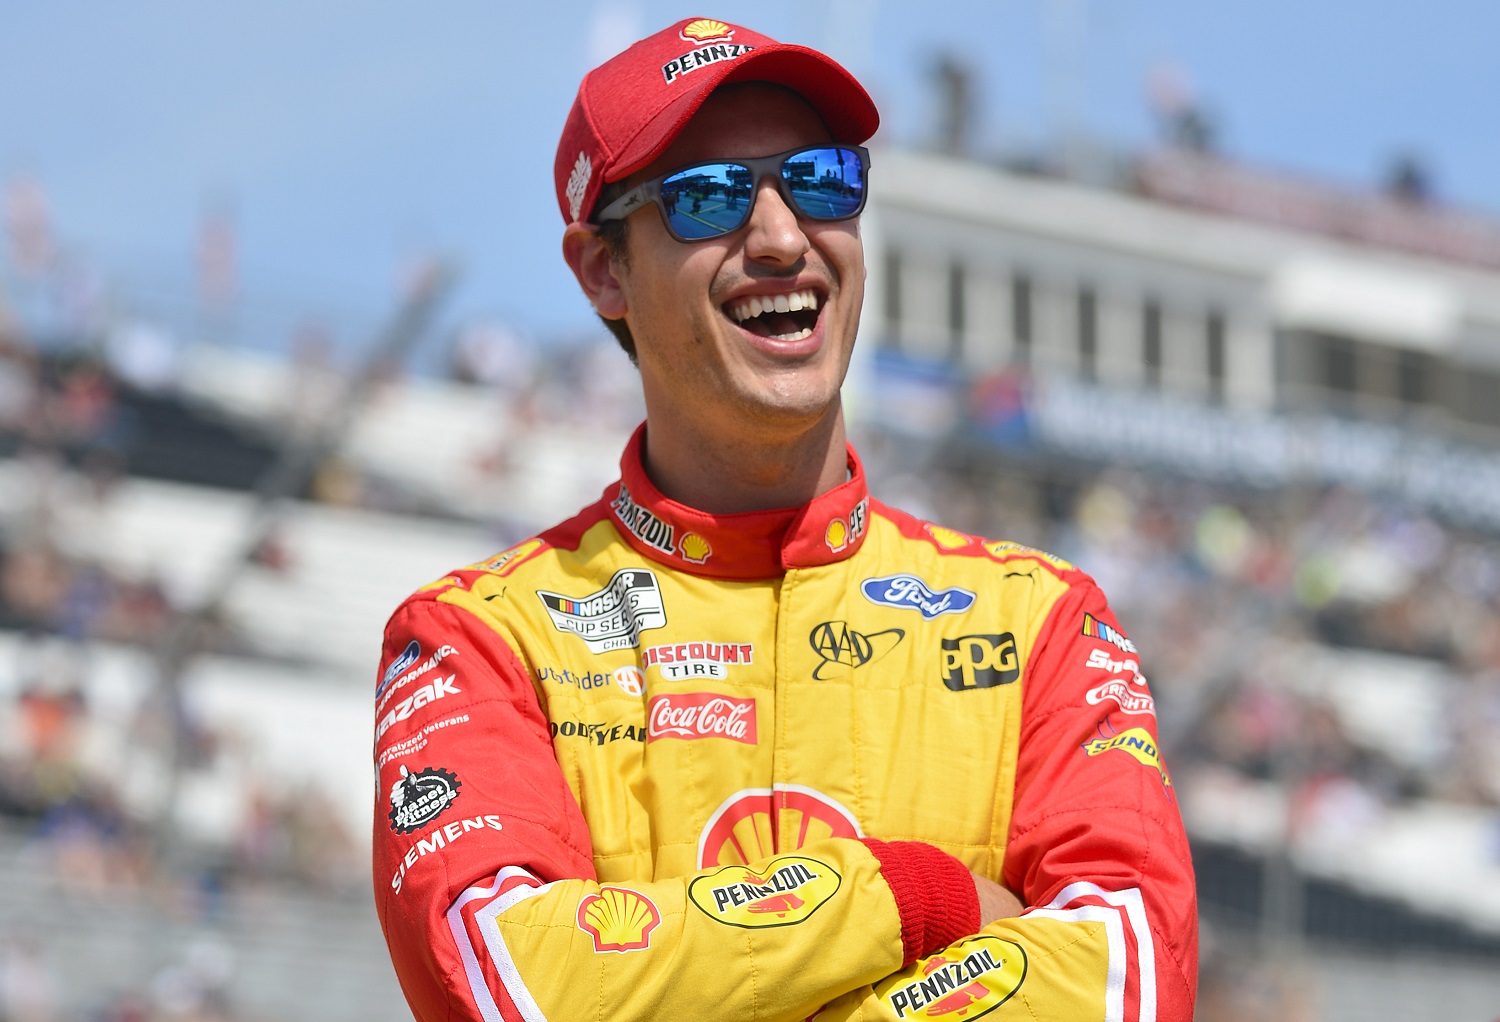 Joey Logano laughs on the grid during qualifying for the NASCAR Cup Series Enjoy Illinois 300 at WWT Raceway on June 4, 2022 in Madison, Illinois.